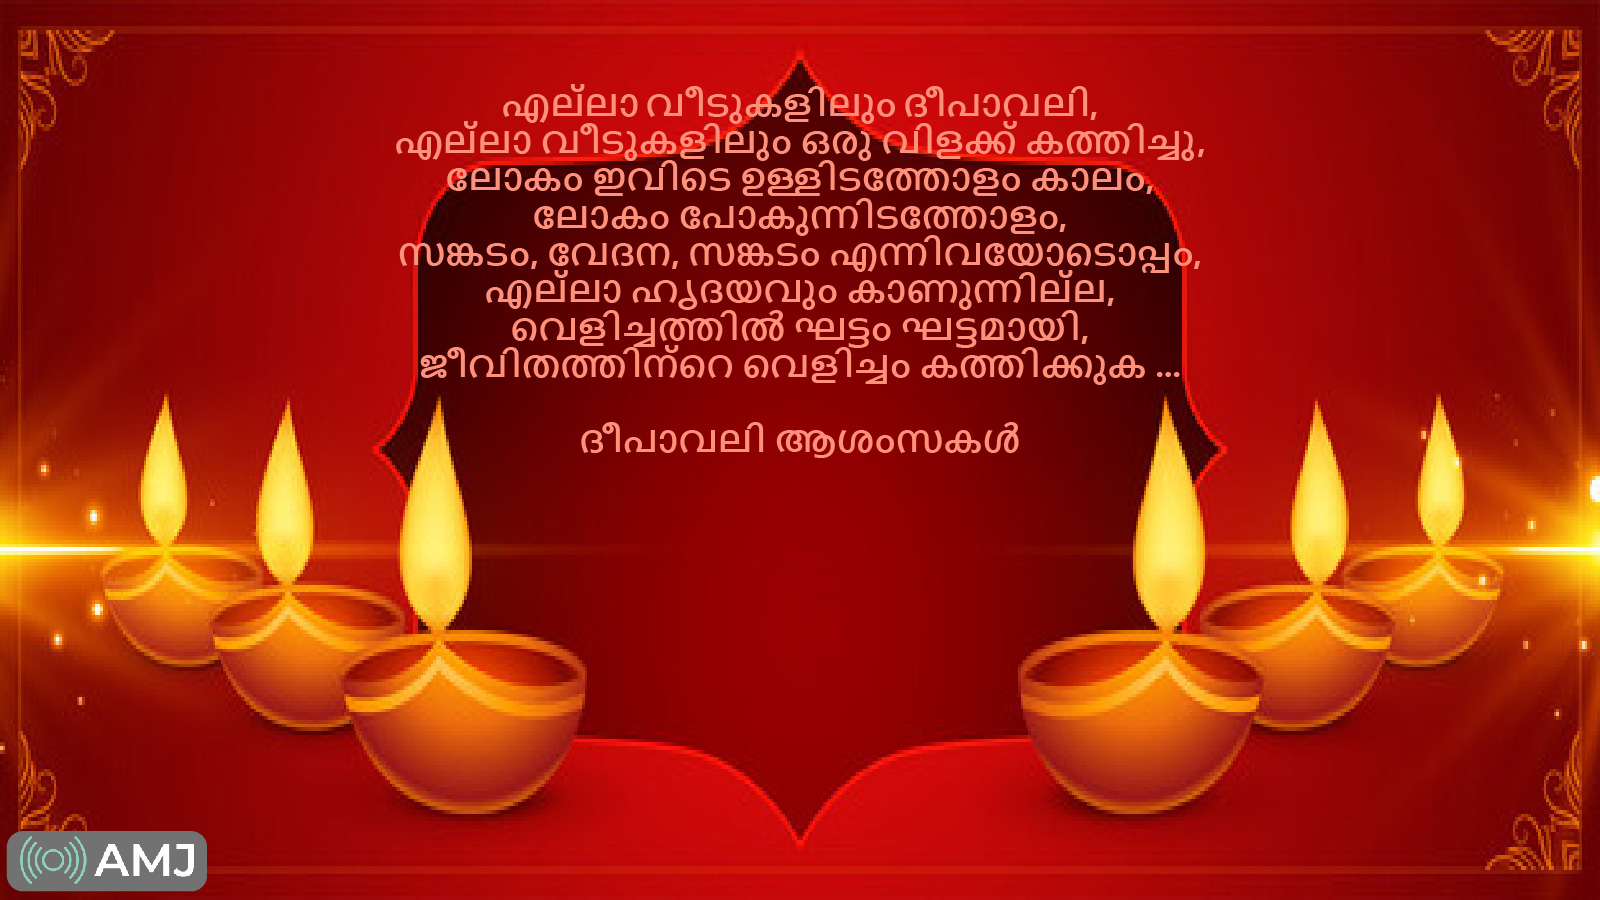 Happy Diwali Quotes in Malayalam